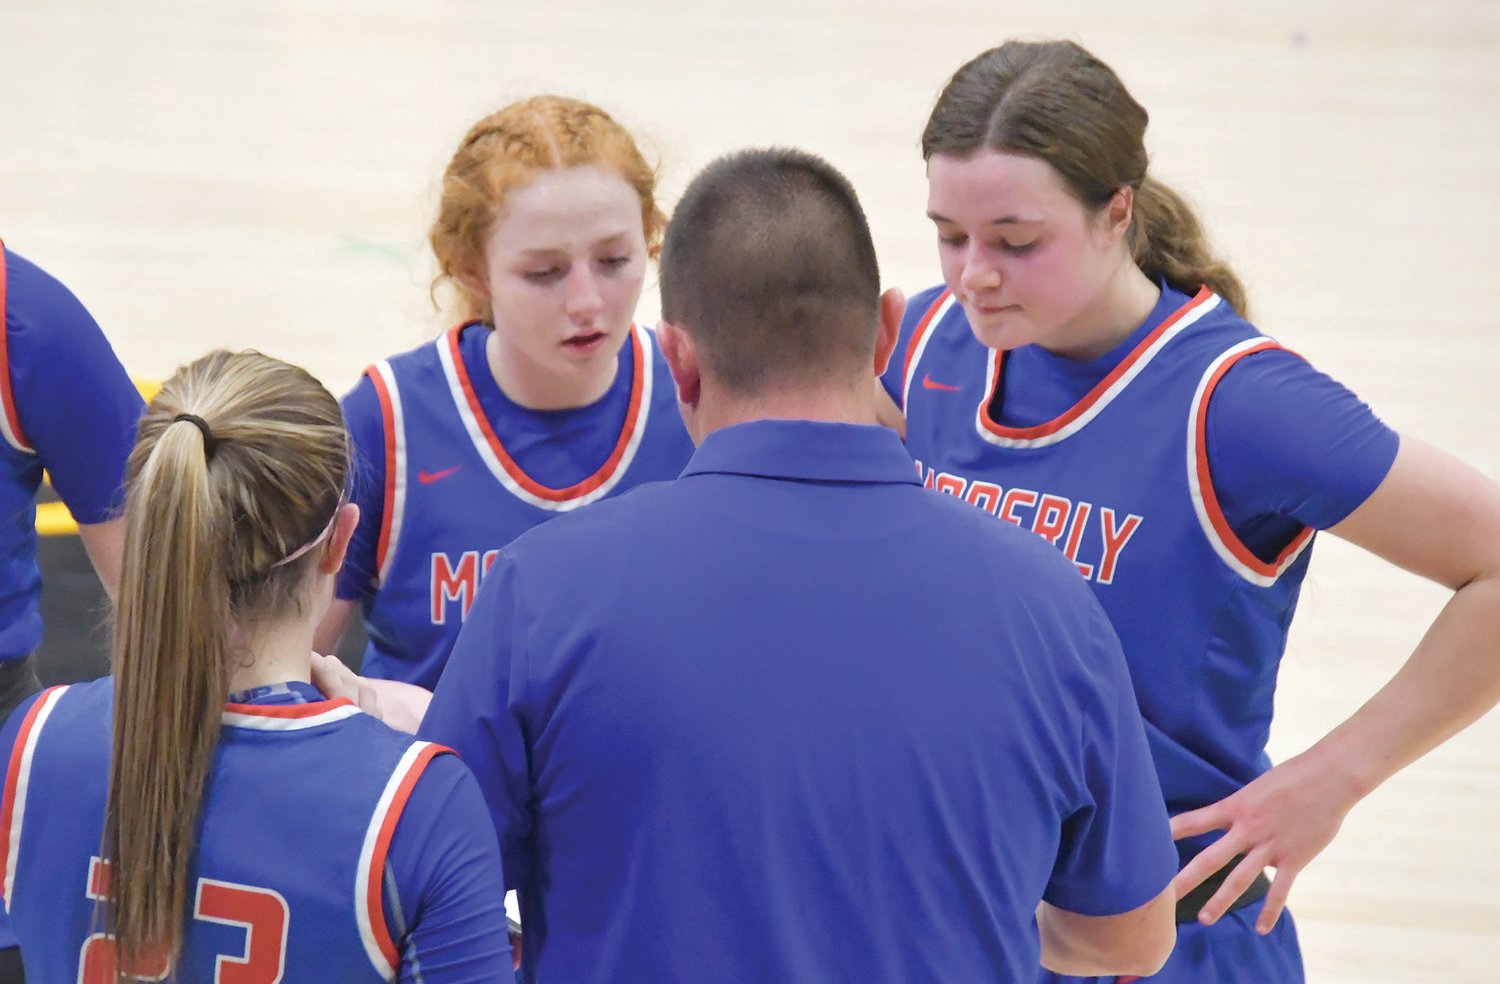 Moberly's Haley Baker (left) and Grace Billington listen to head coach Tony Vestal during a timeout in Monday's game. The Spartans defeated the Panthers, 58-29.